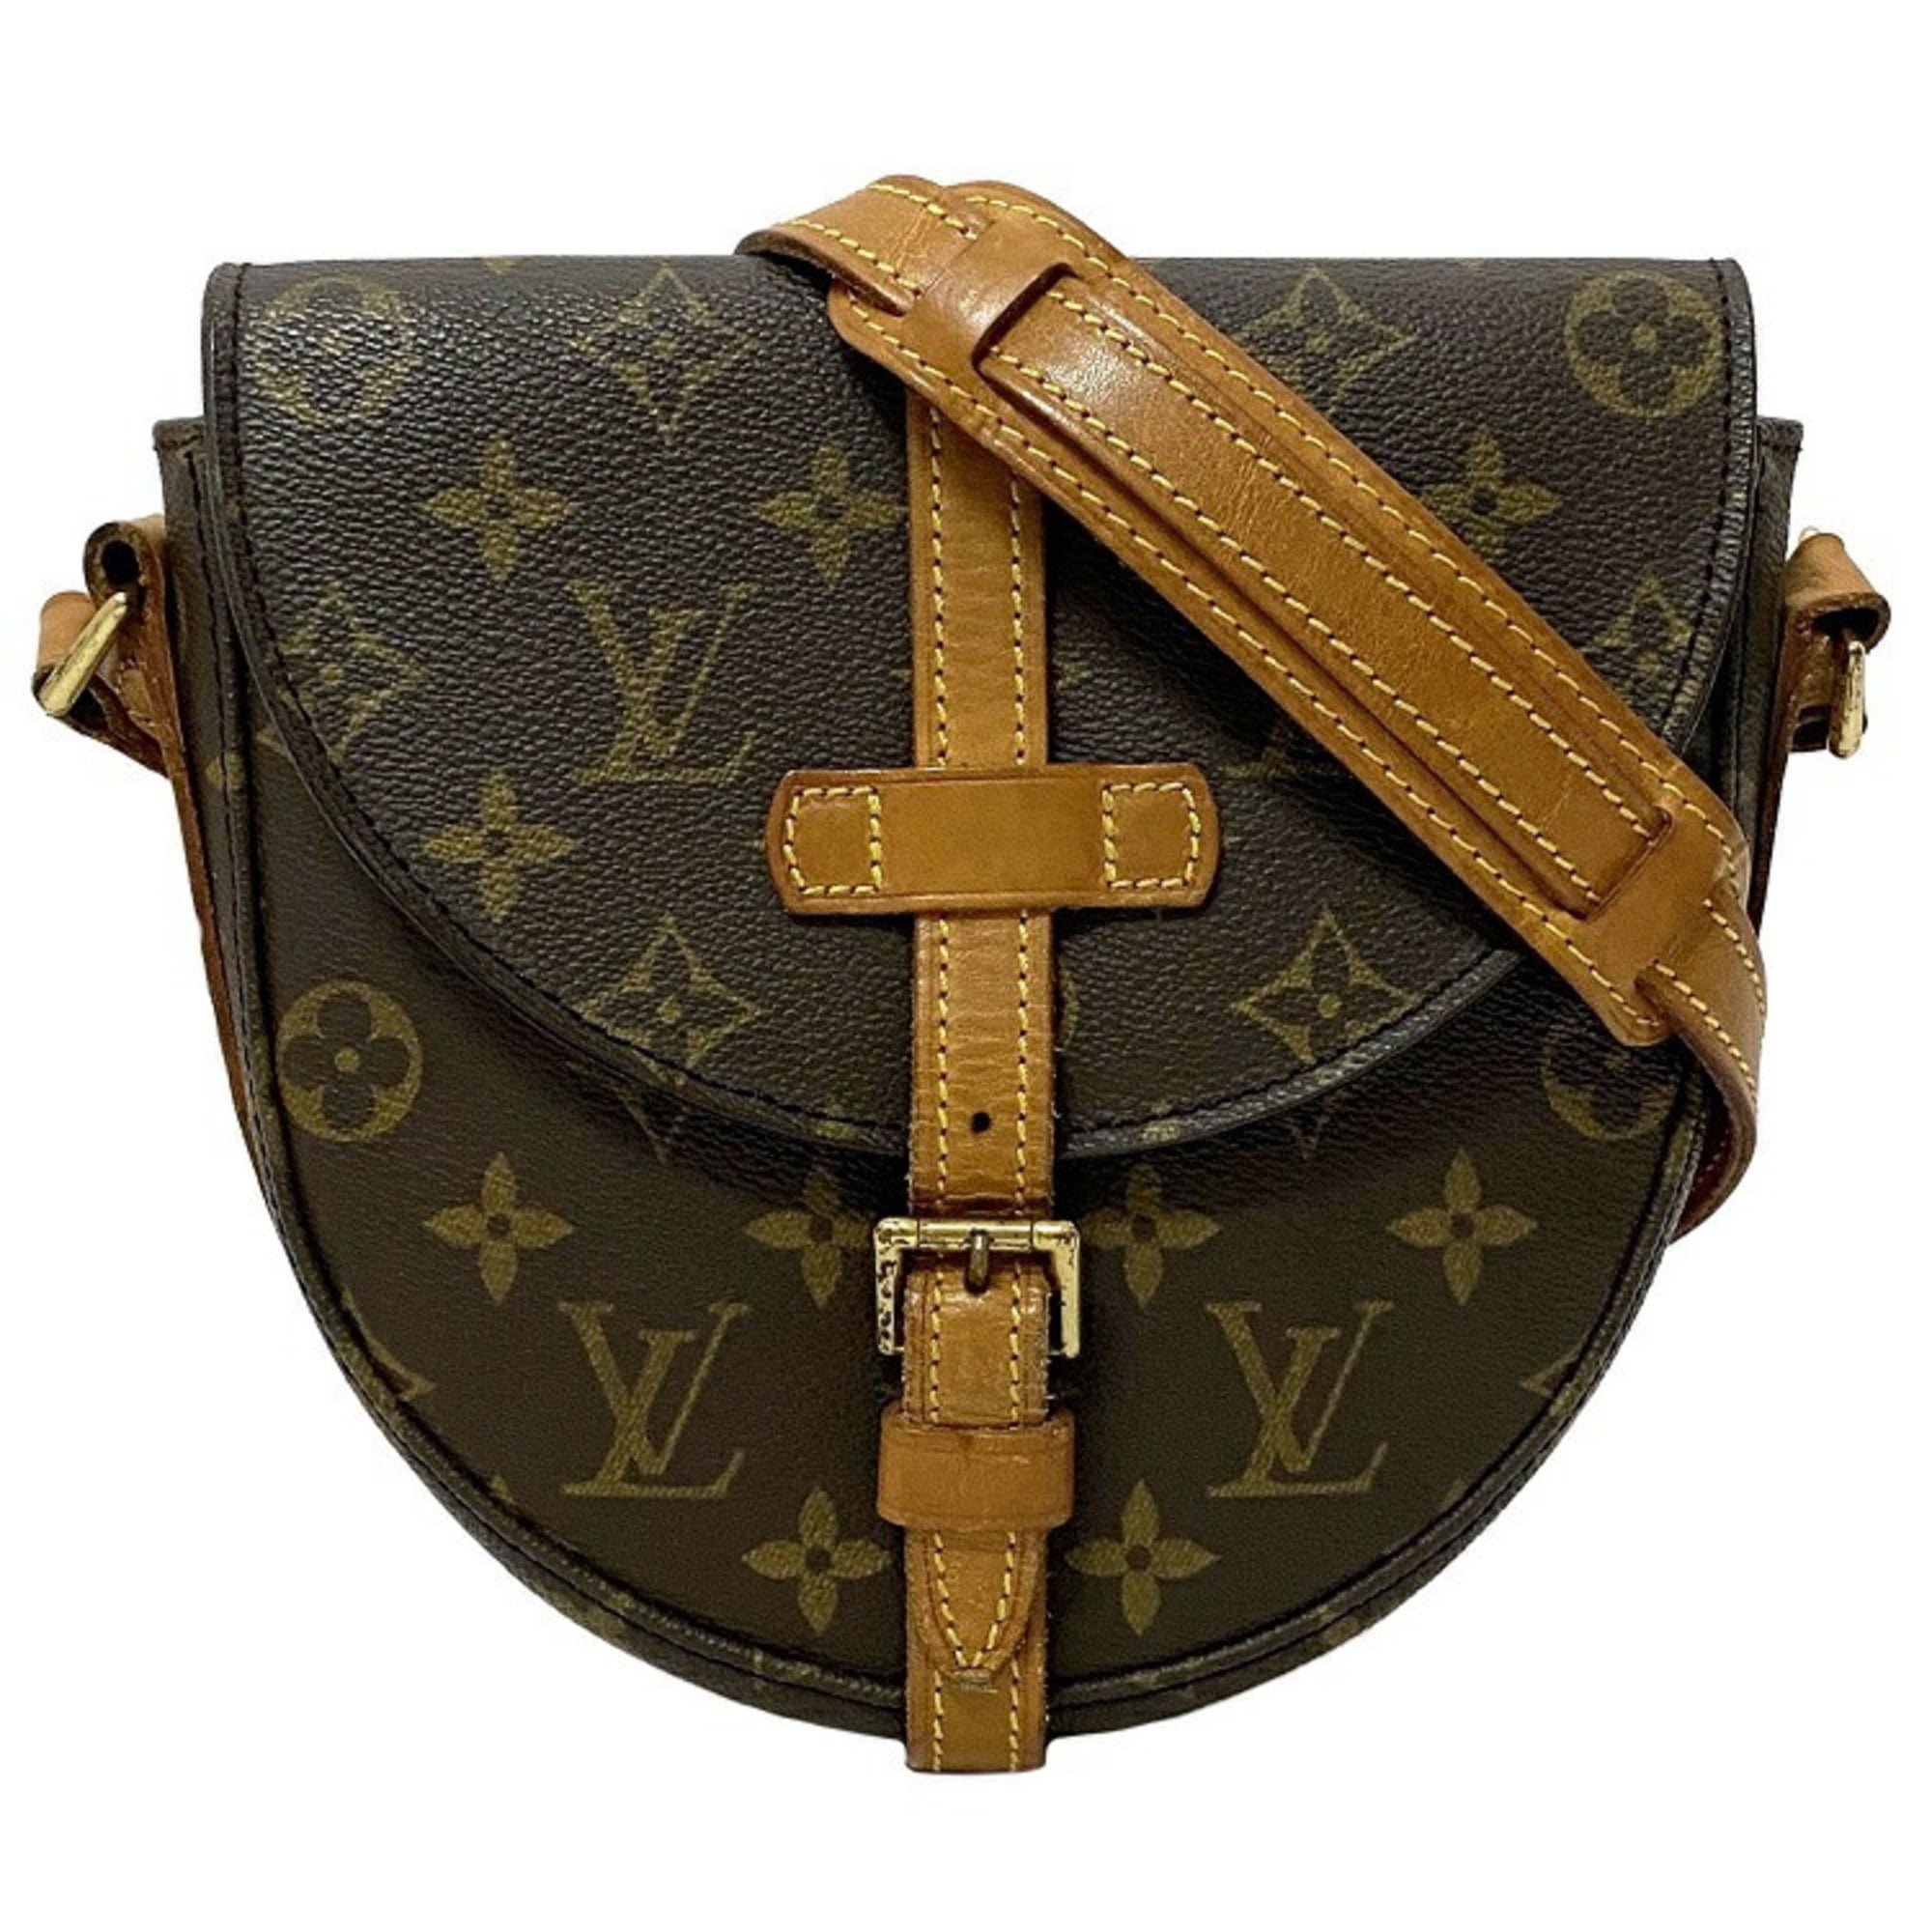 Louis Vuitton - Authenticated Handbag - Cloth Brown for Women, Very Good Condition